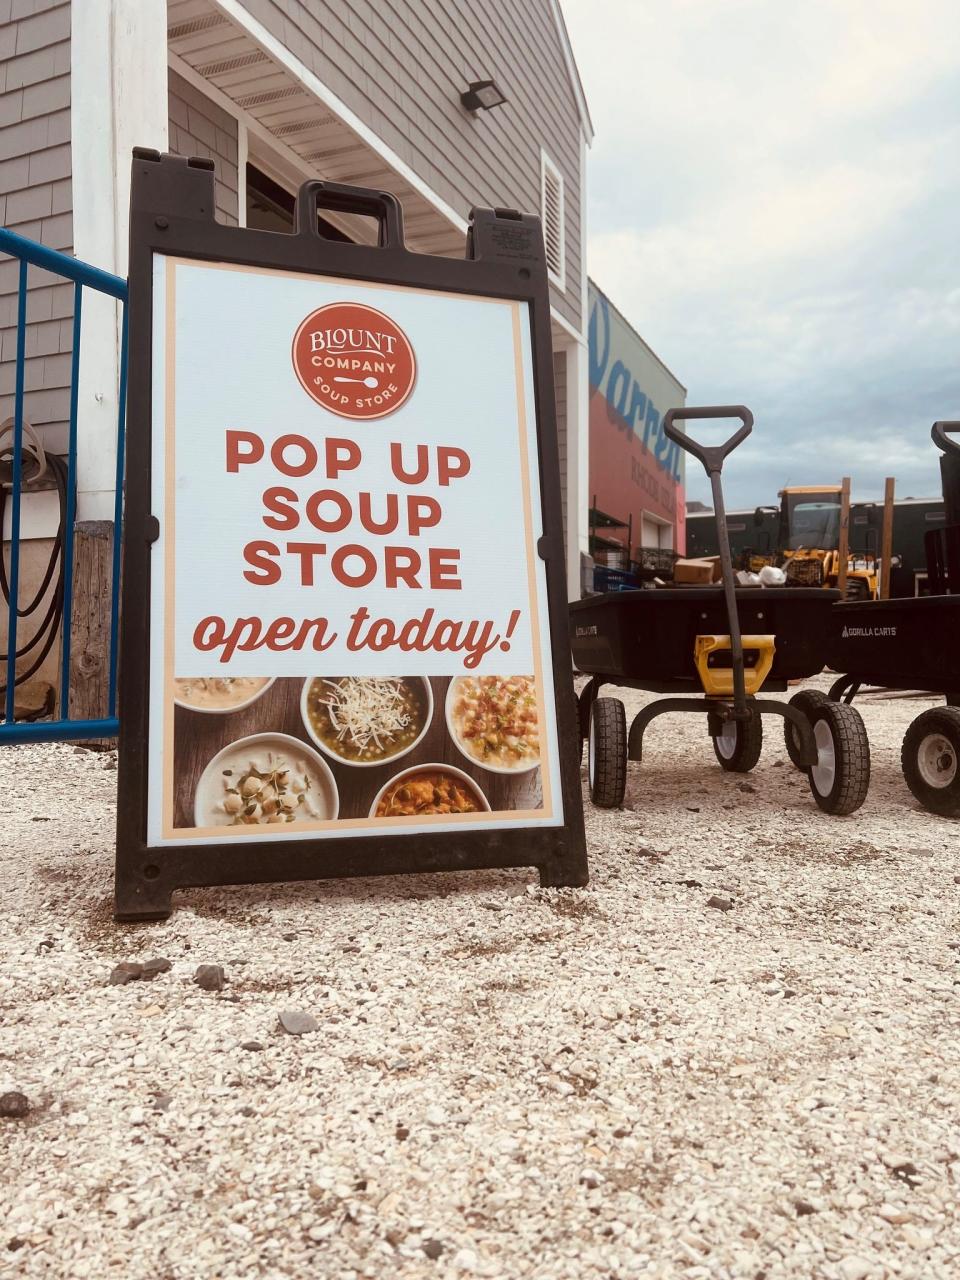 Blount Clam Shack & Market's Pop Up Soup Store will be open Friday, March 31, from 10 a.m. to 5 p.m. and Saturday, April 1, from 10 a.m. 2 p.m.